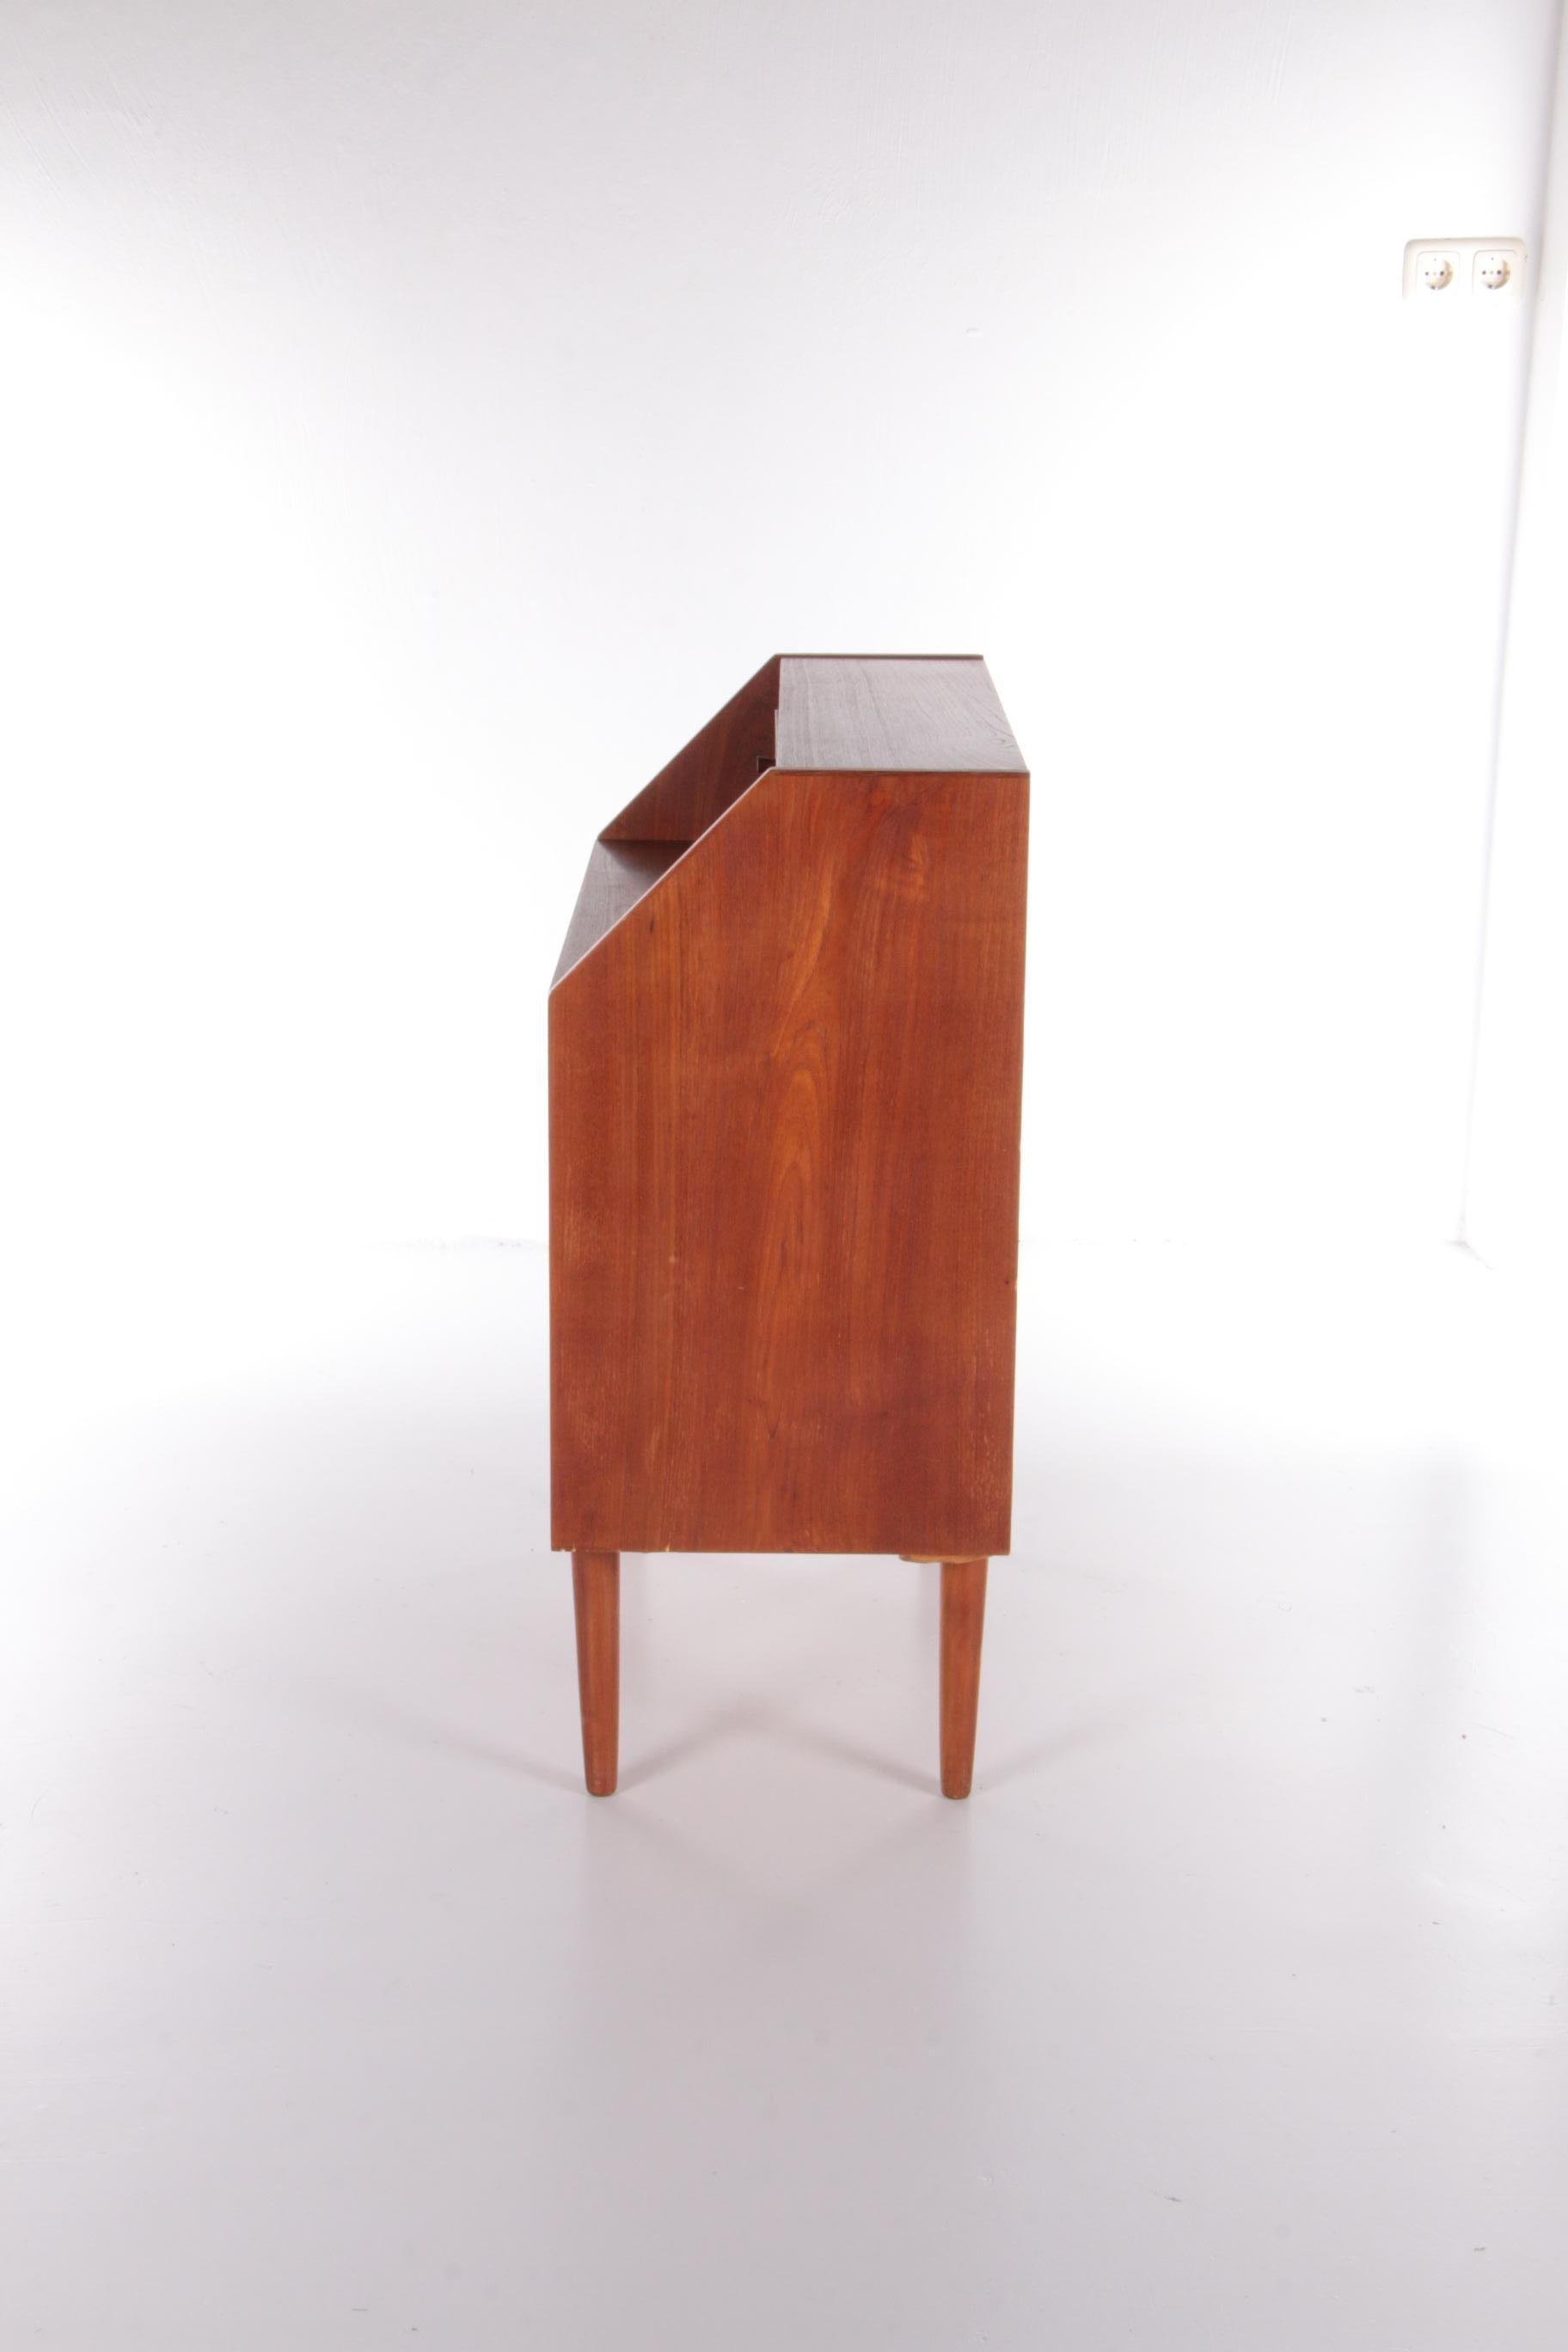 Mid-20th Century Vintage Danish Design Desk with Drawers, 1960s